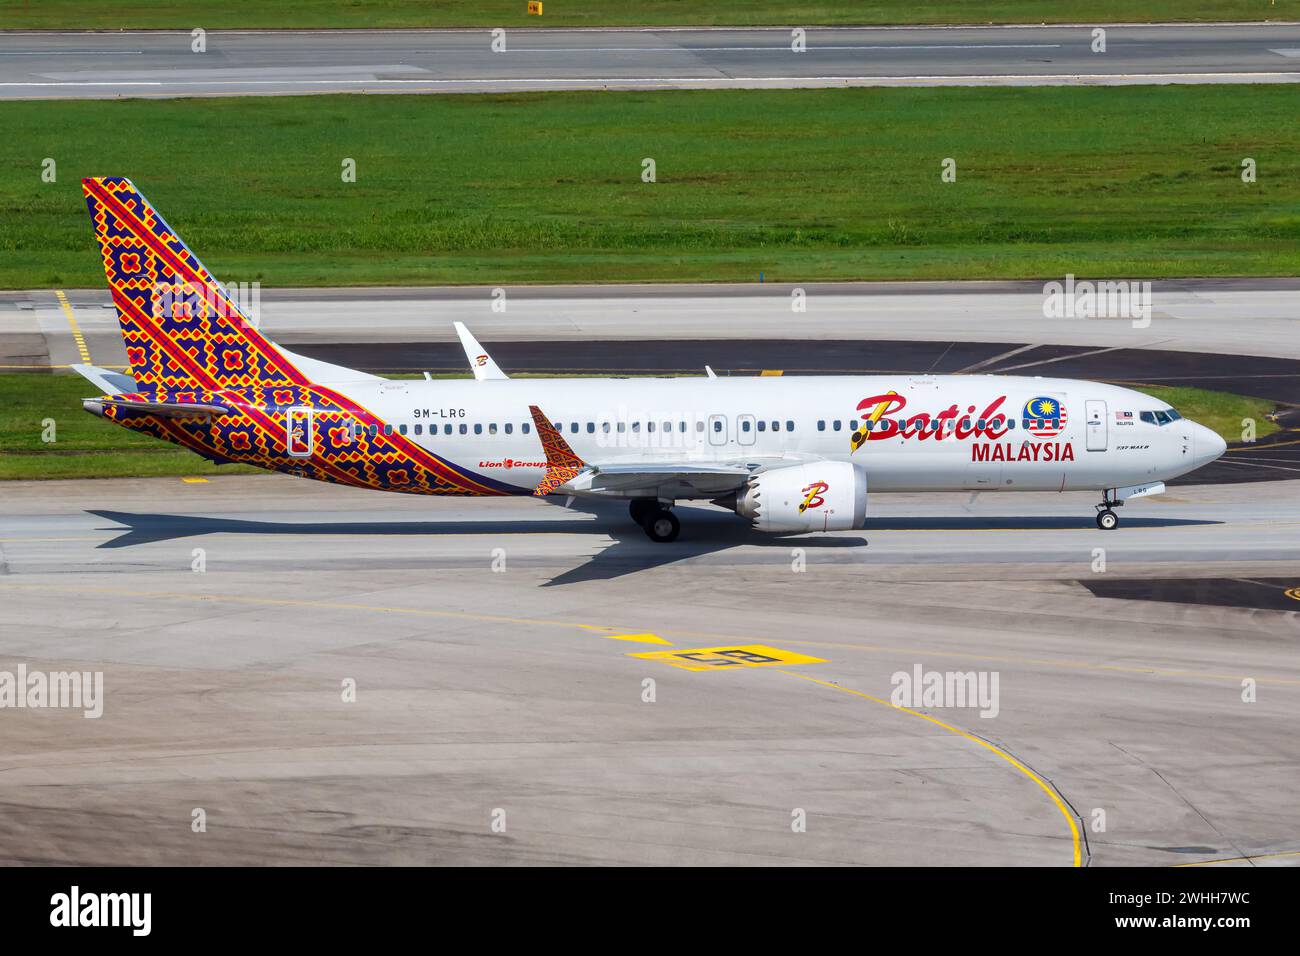 Changi, Singapore - February 3, 2023: A Batik Air Malaysia Boeing 737 MAX 8 Aircraft With The 9M-LRG Flag At Changi Airport (SIN) In Singapore. Stock Photo